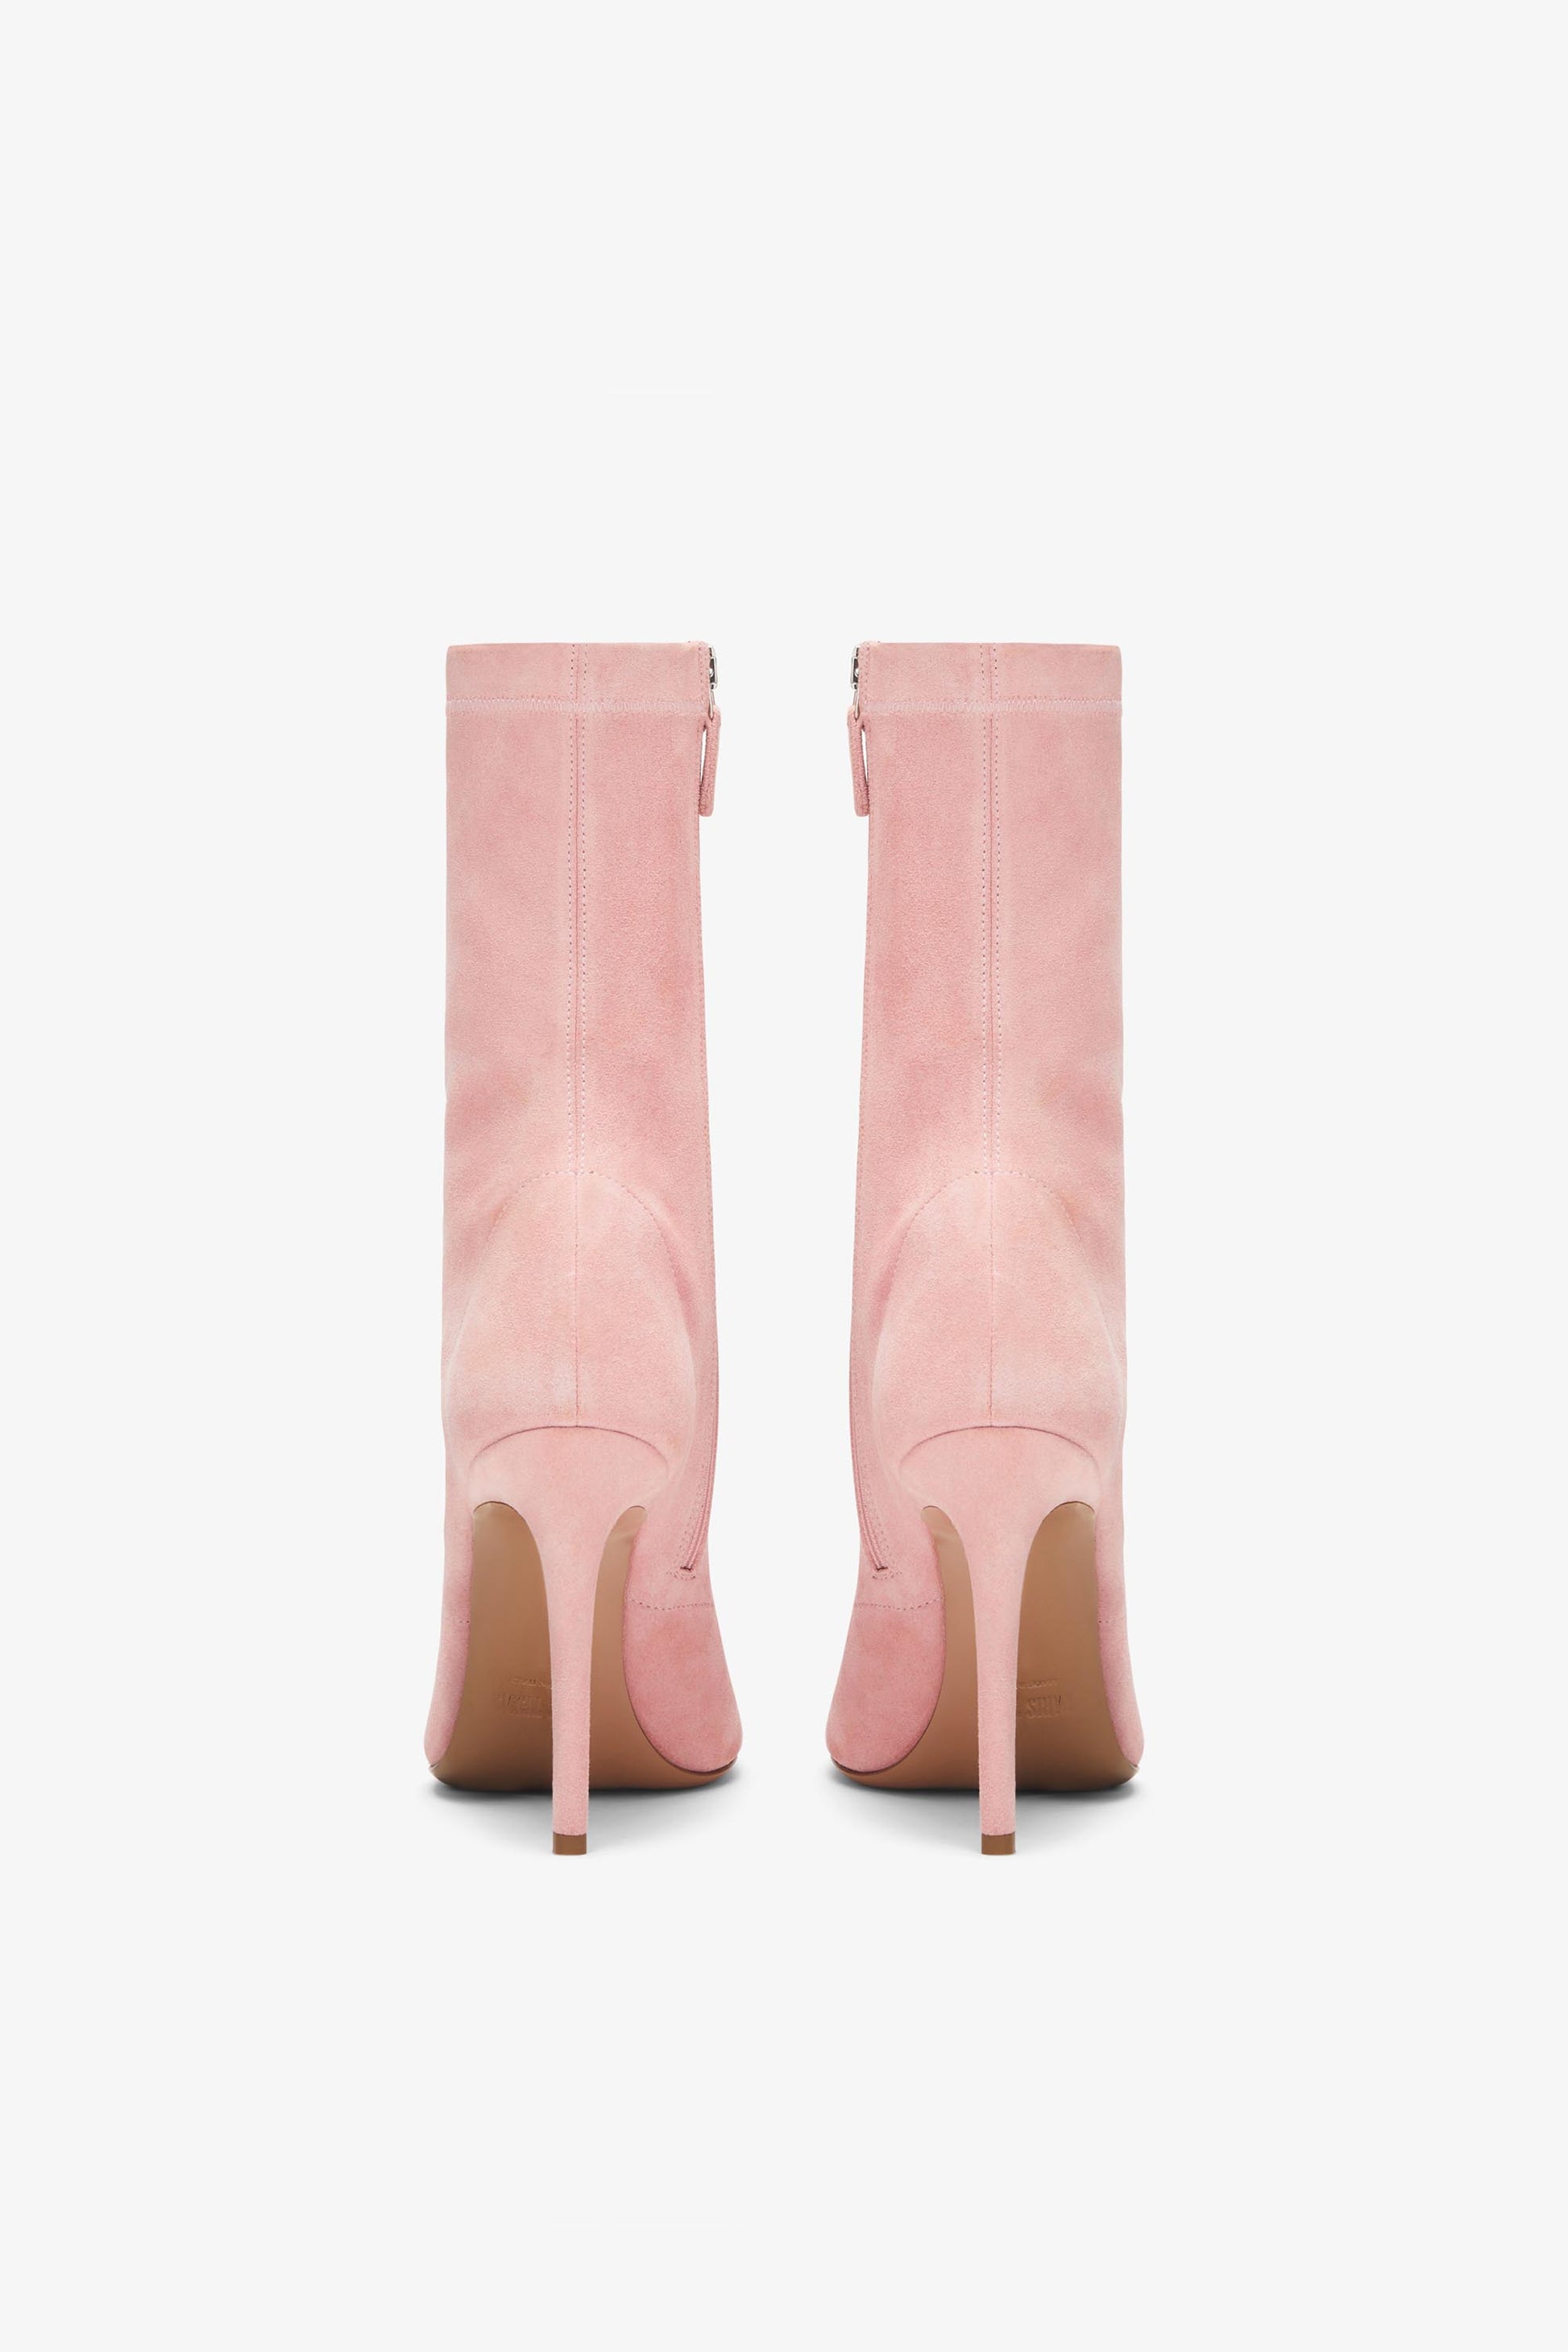 Pink stretch suede ankle boot